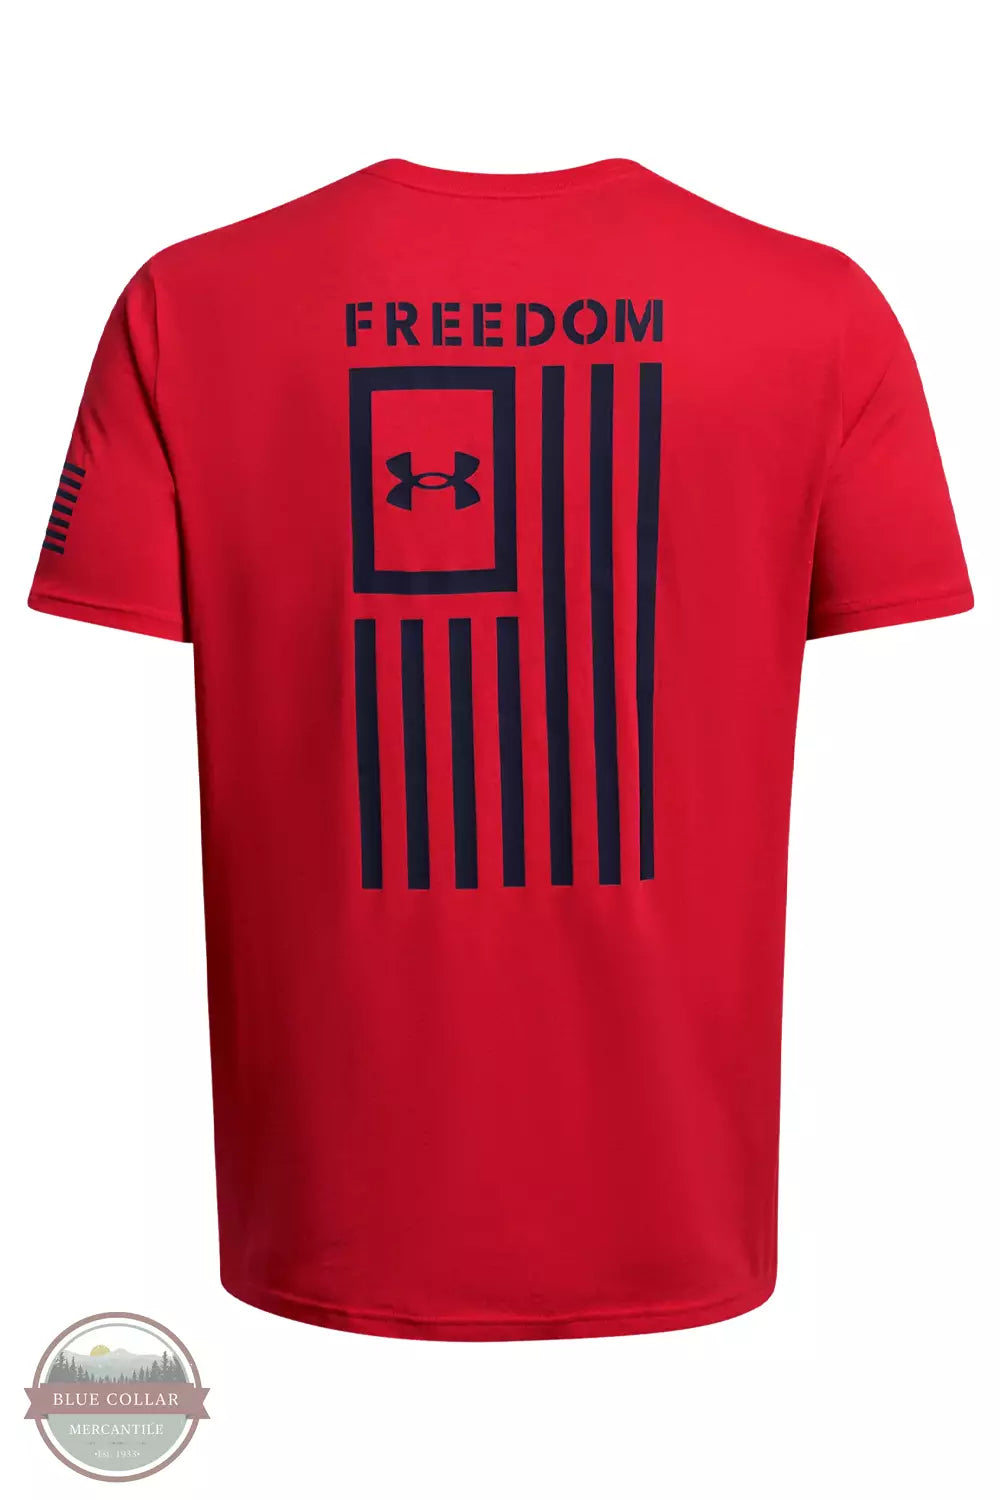 Under Armour 1370810 Men's UA Freedom Flag T-Shirt Red Midnight Navy Back View